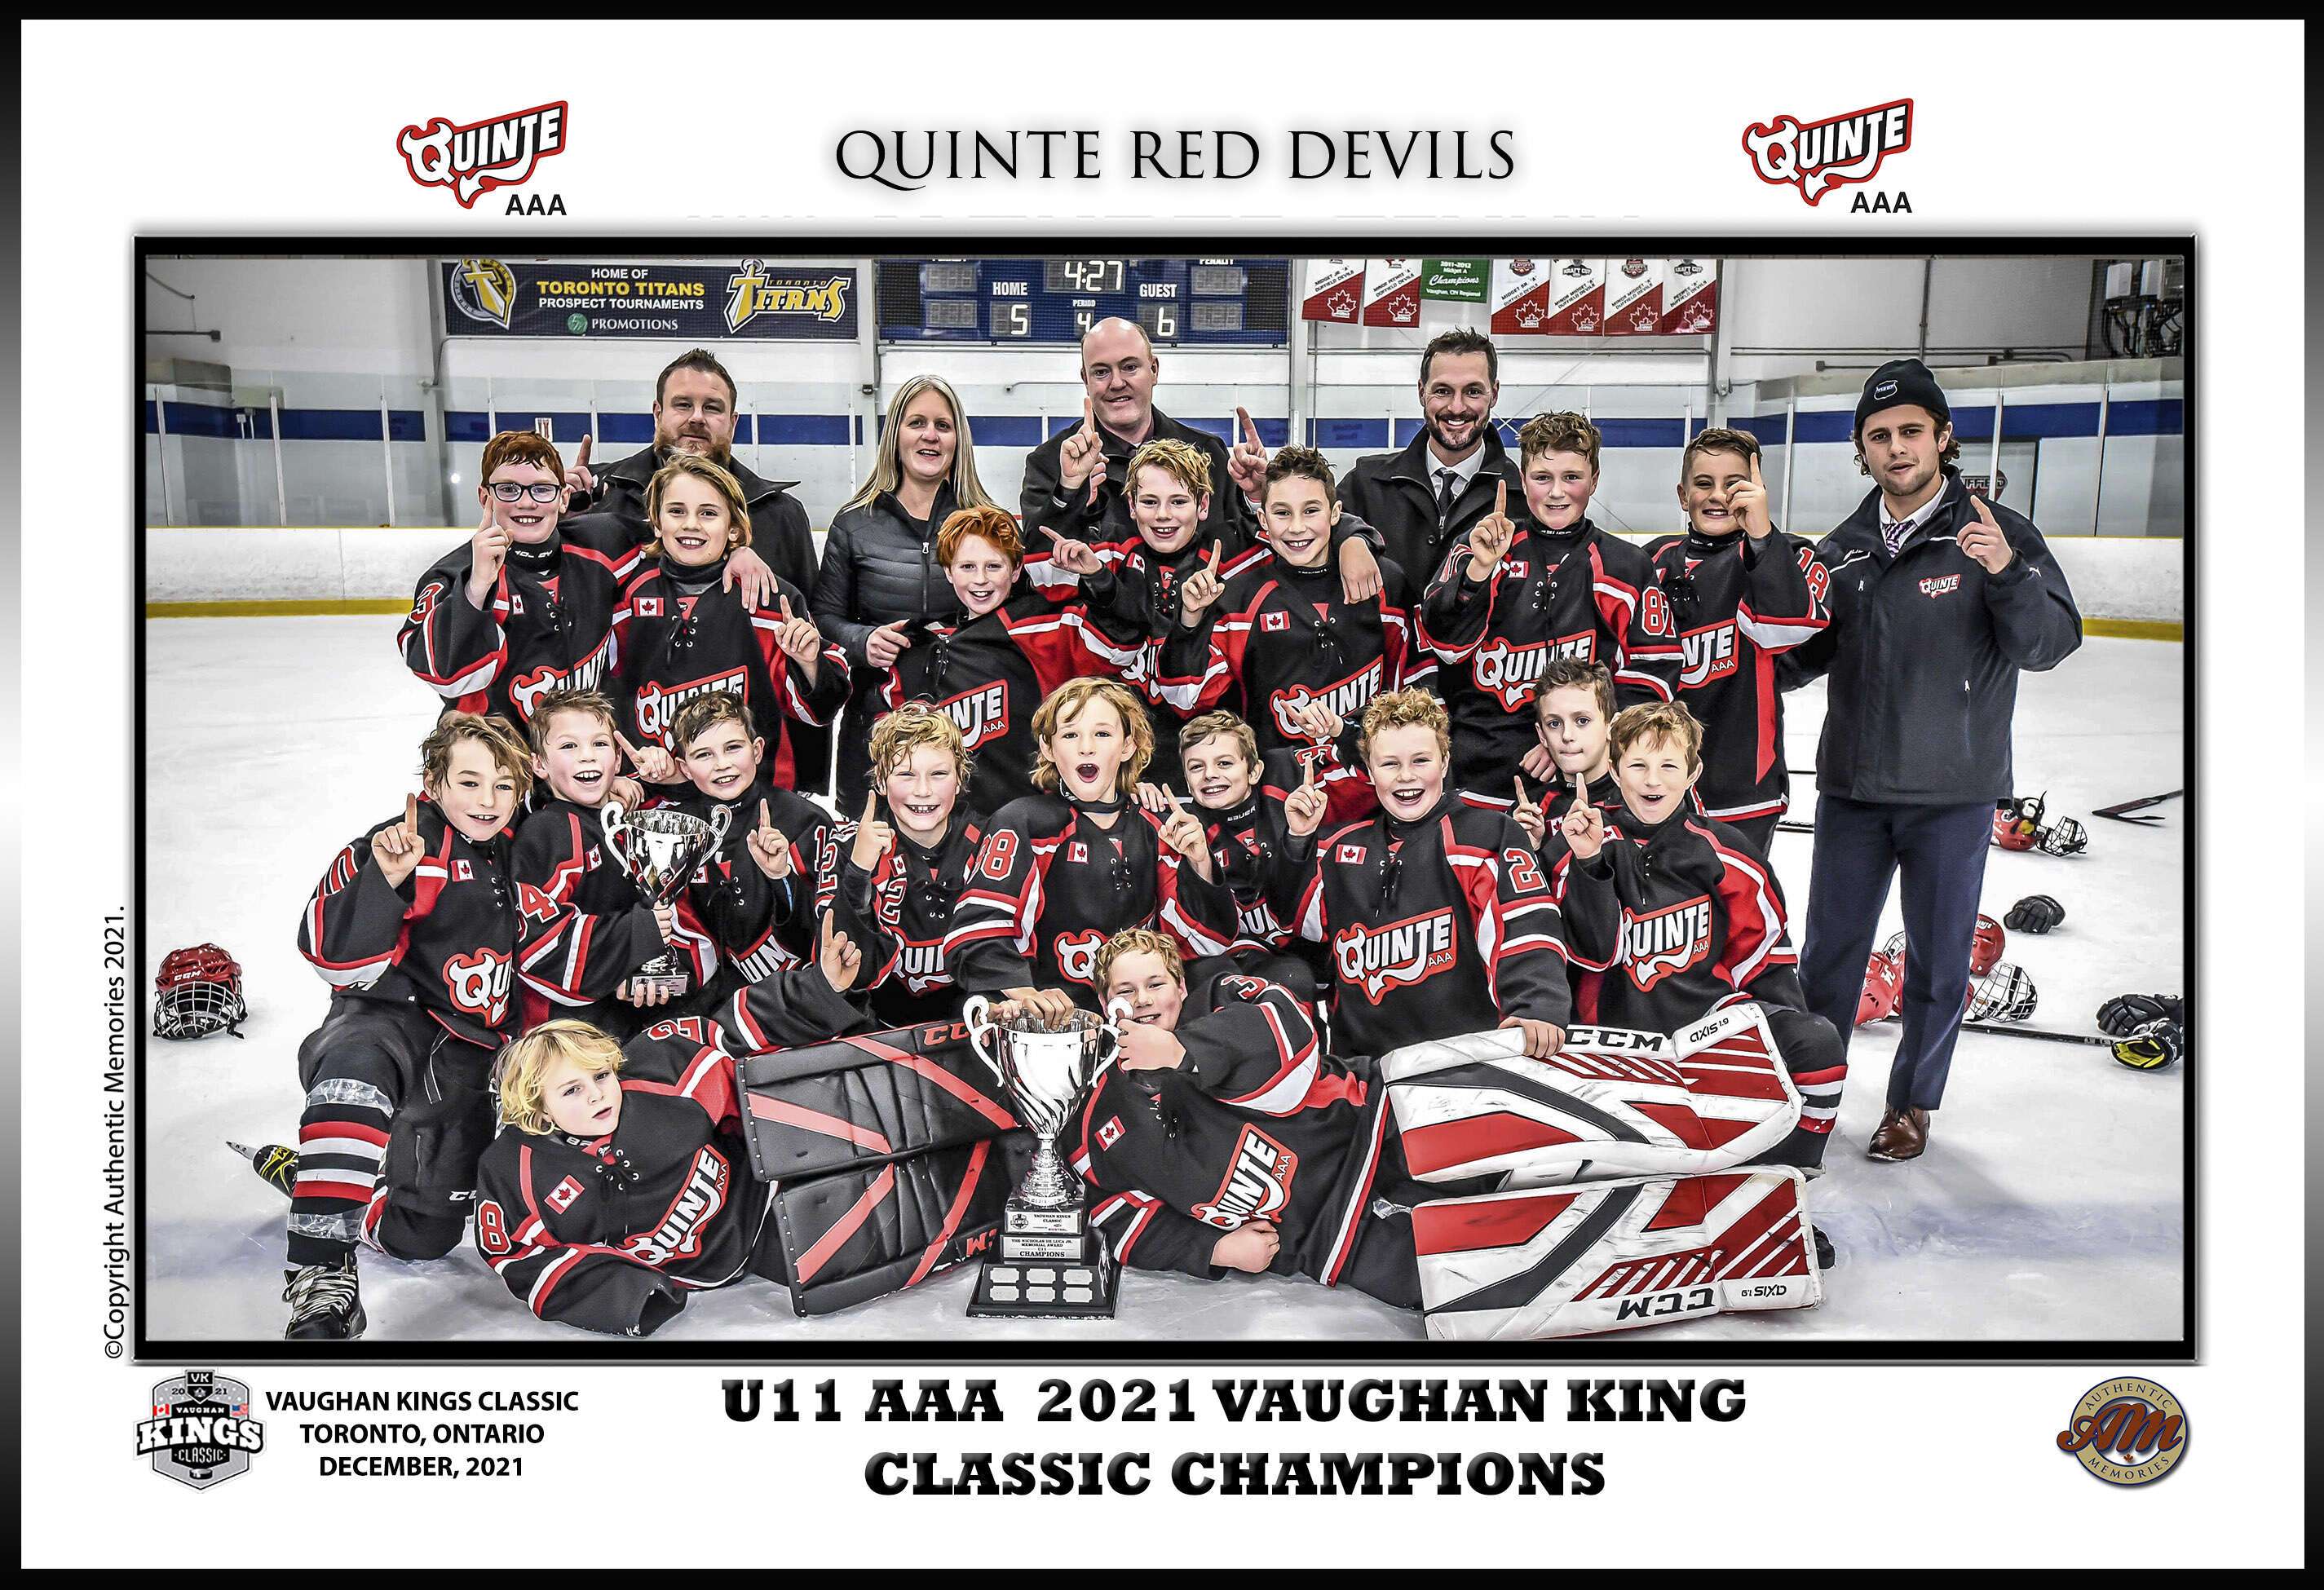 News > QRD Weekly Report - Sunday Sept 13, 2015 (Quinte Red Devils)